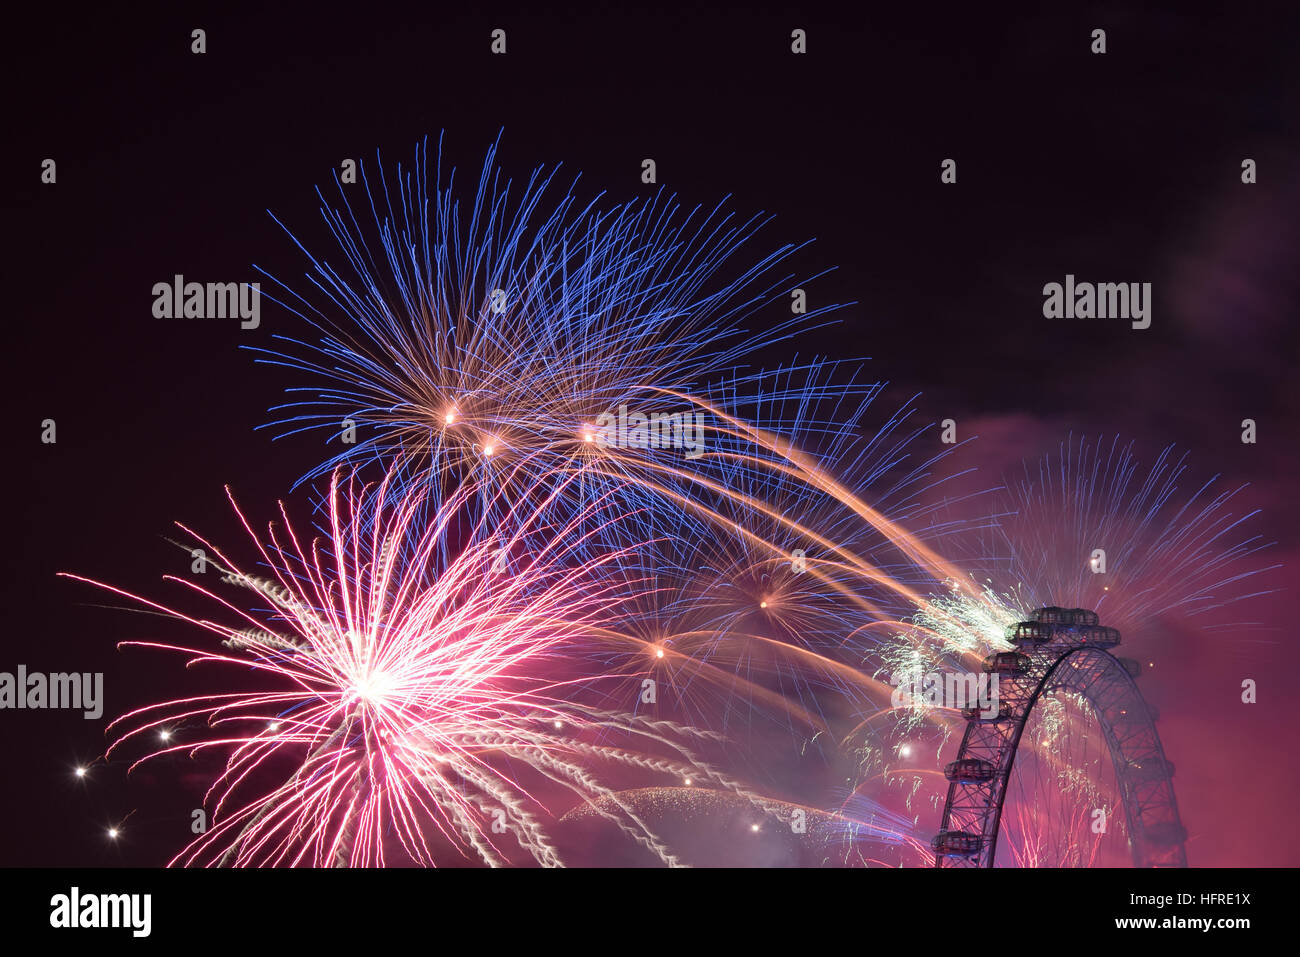 Extraterrestrial London Eye South Bank Fireworks Display NYE 2016 New Year in London Stock Photo